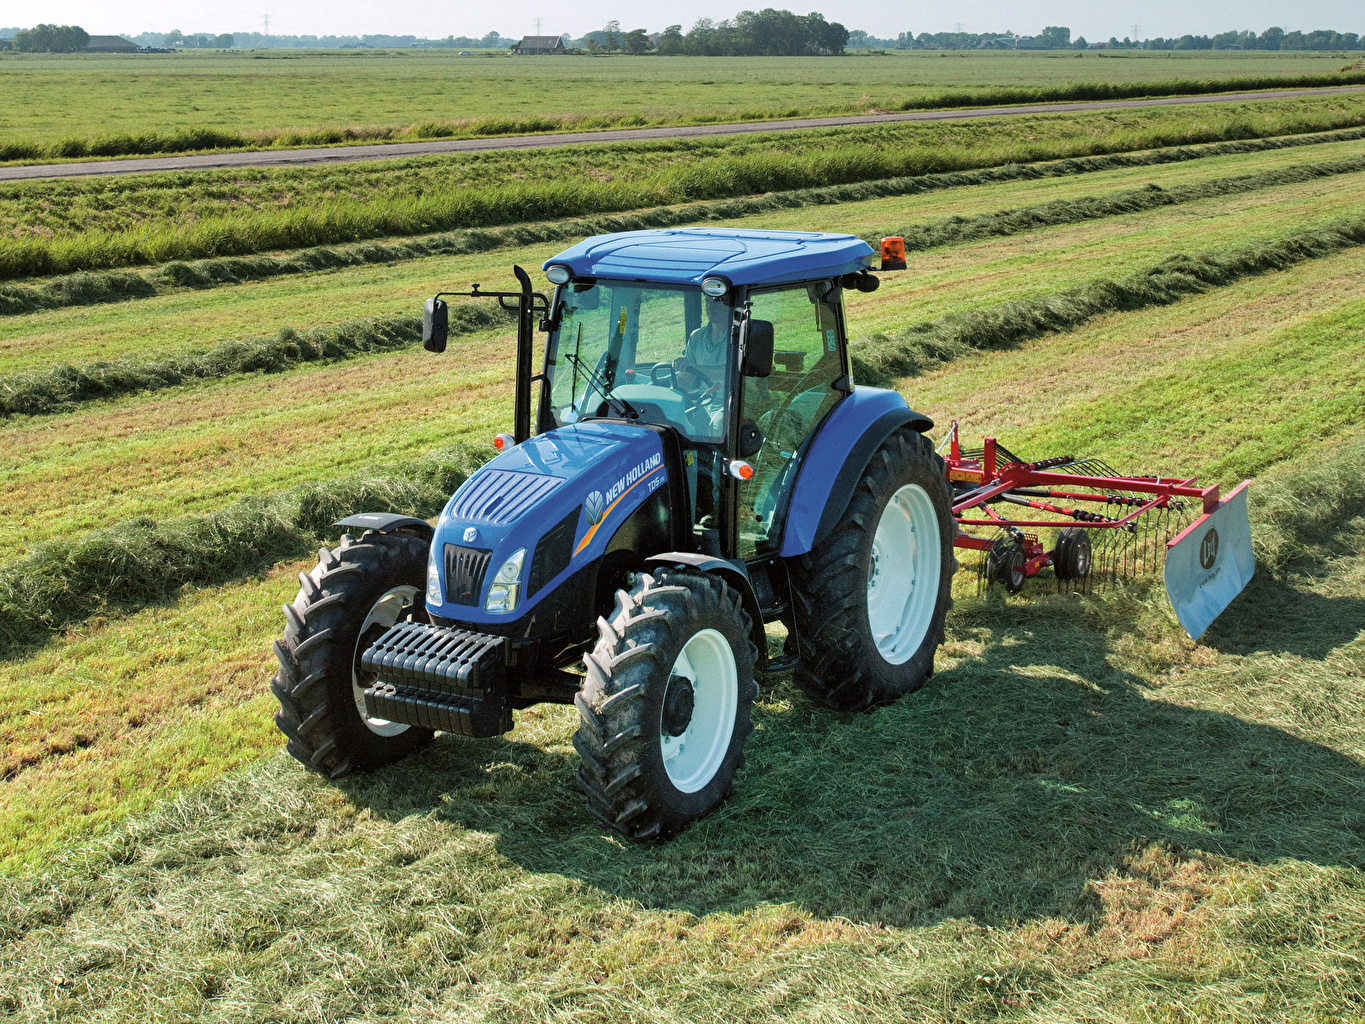 Production of agricultural tractors